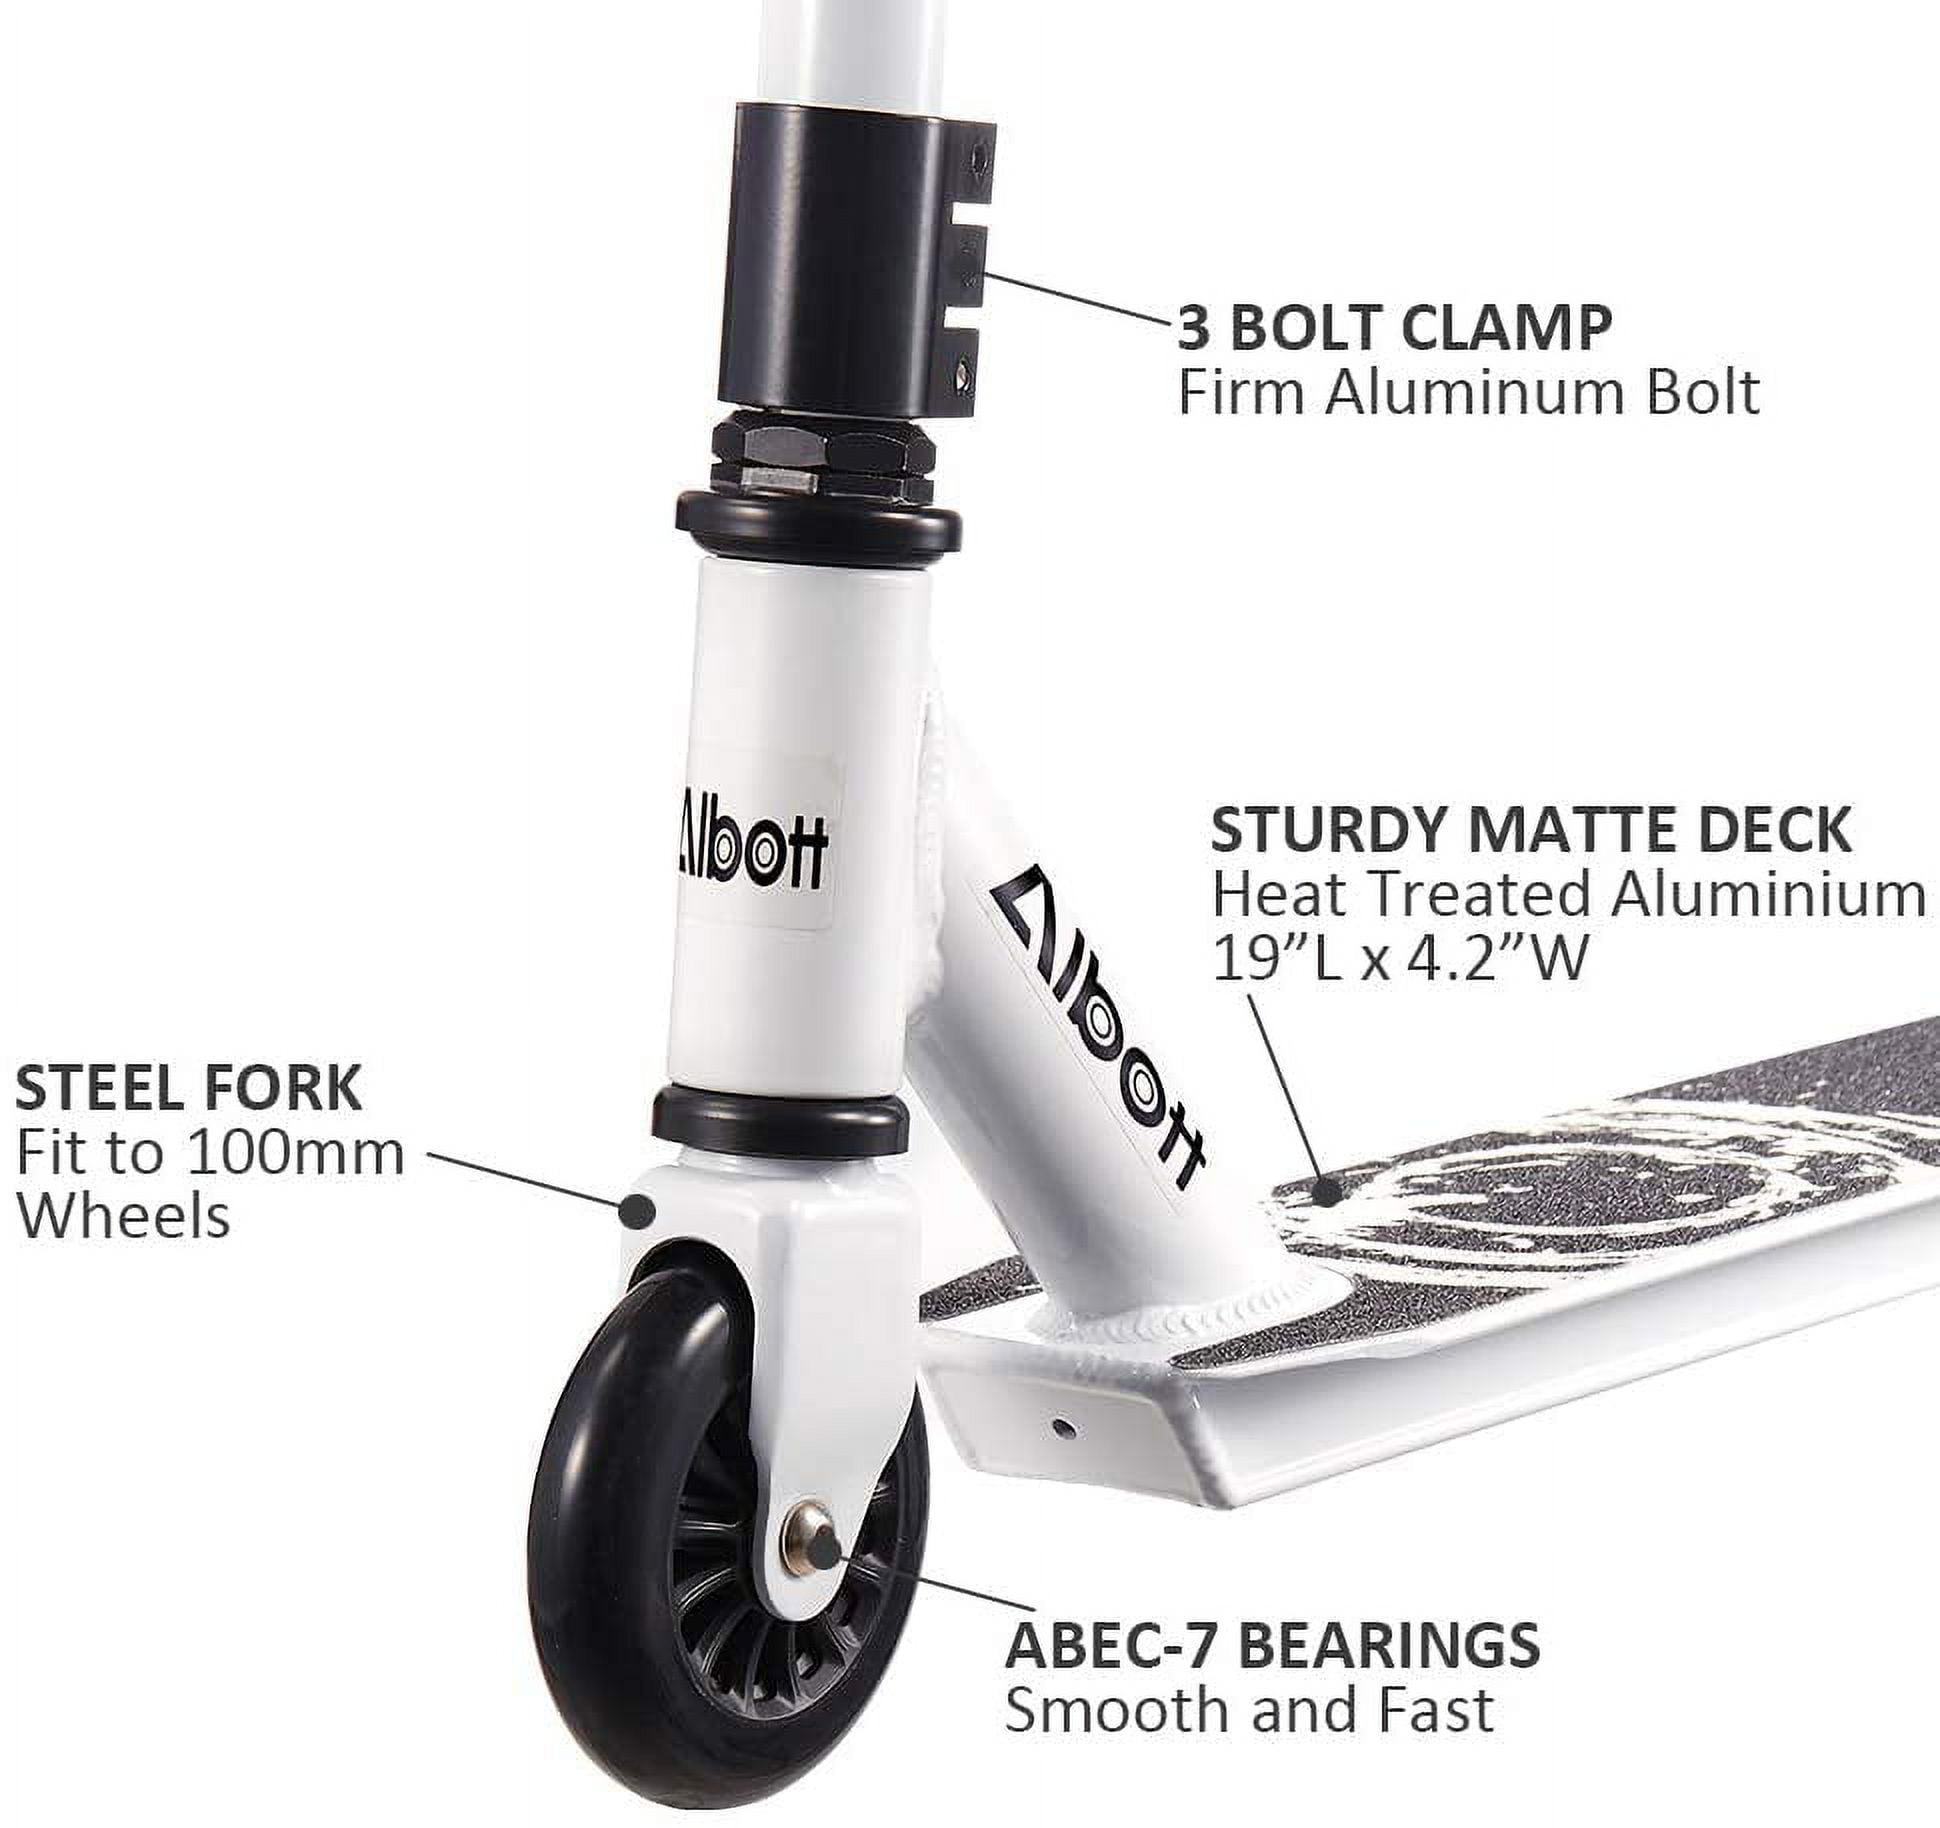  Stunt Scooters - Stunt Scooters / Sport Scooters: Sports &  Outdoors